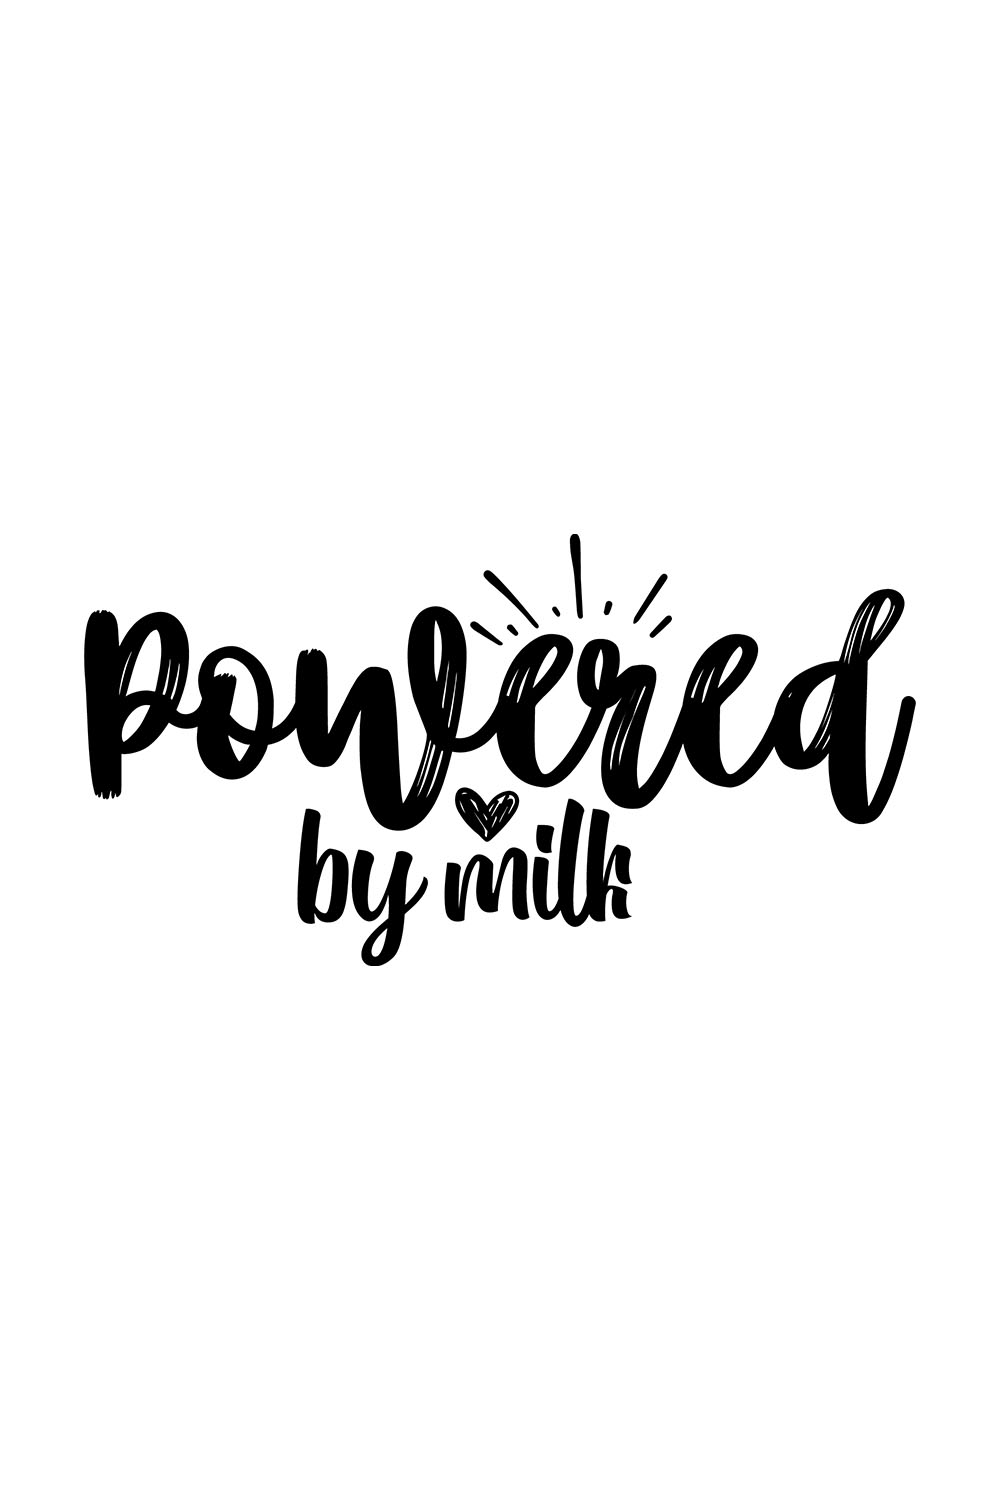 An image with a charming black inscription powered by milk.